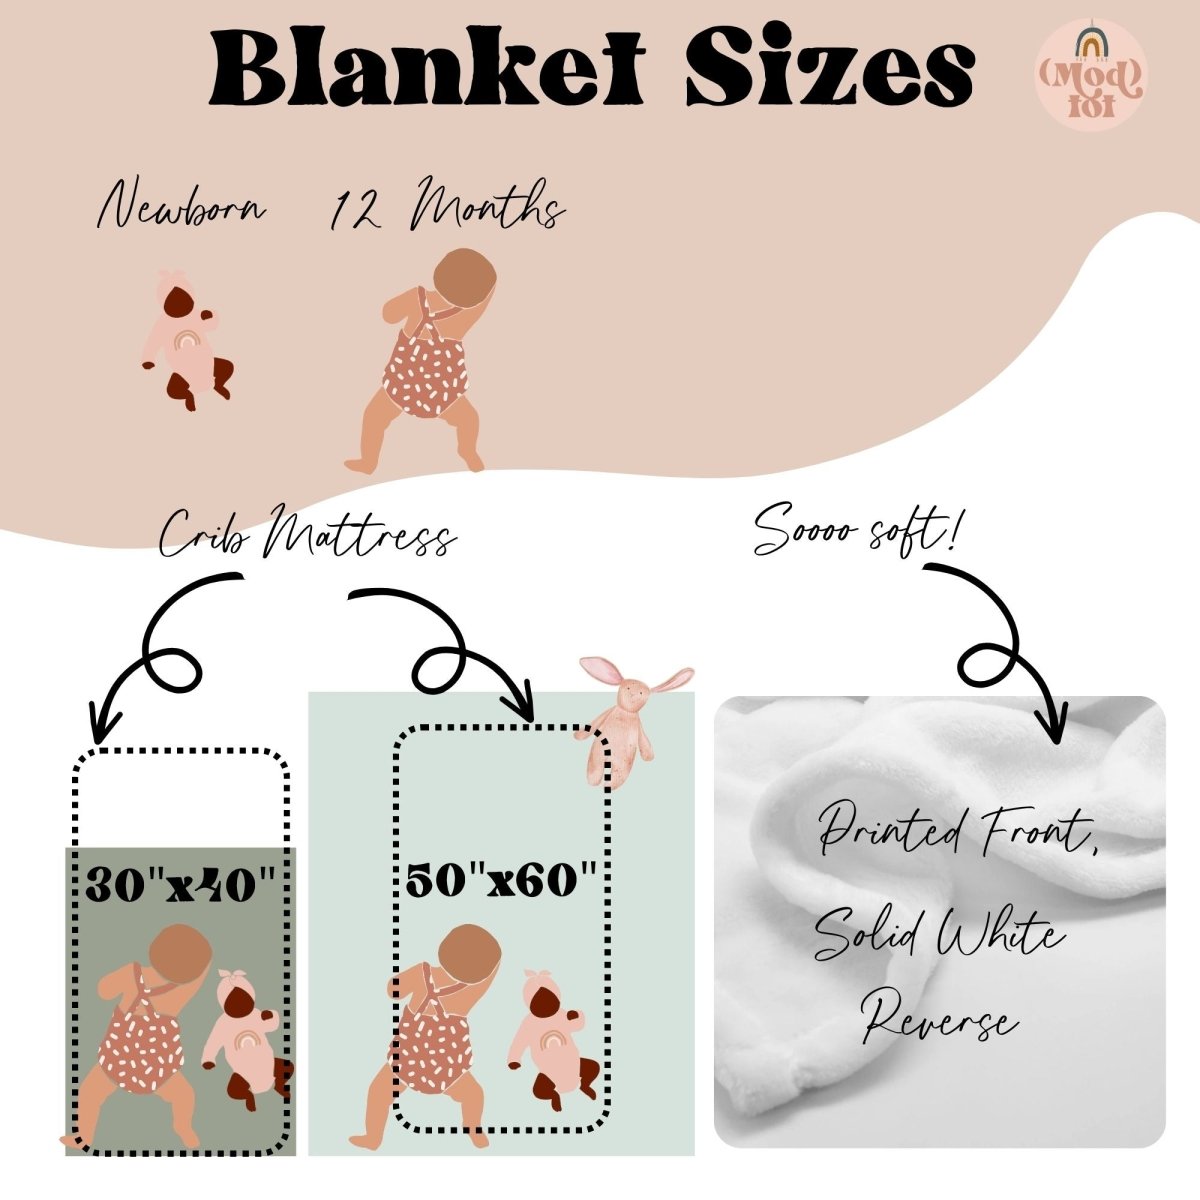 Whisper Floral Personalized Minky Blanket - gender_girl, Personalized_Yes, text